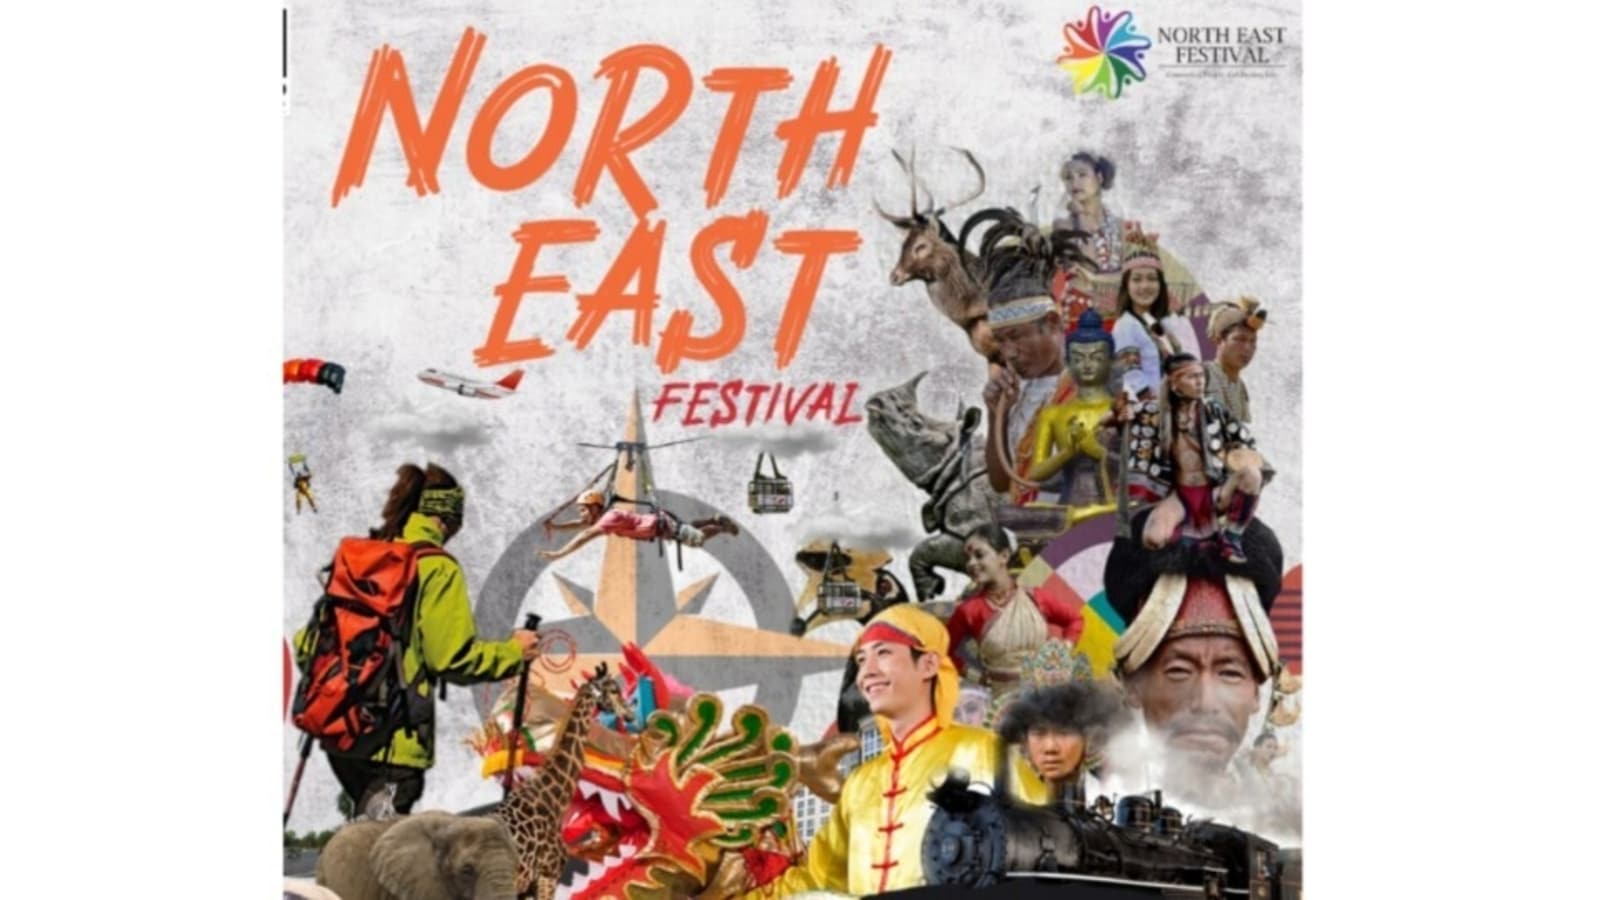 Delhi gears to host 10th North East Festival from Dec 23 to promote